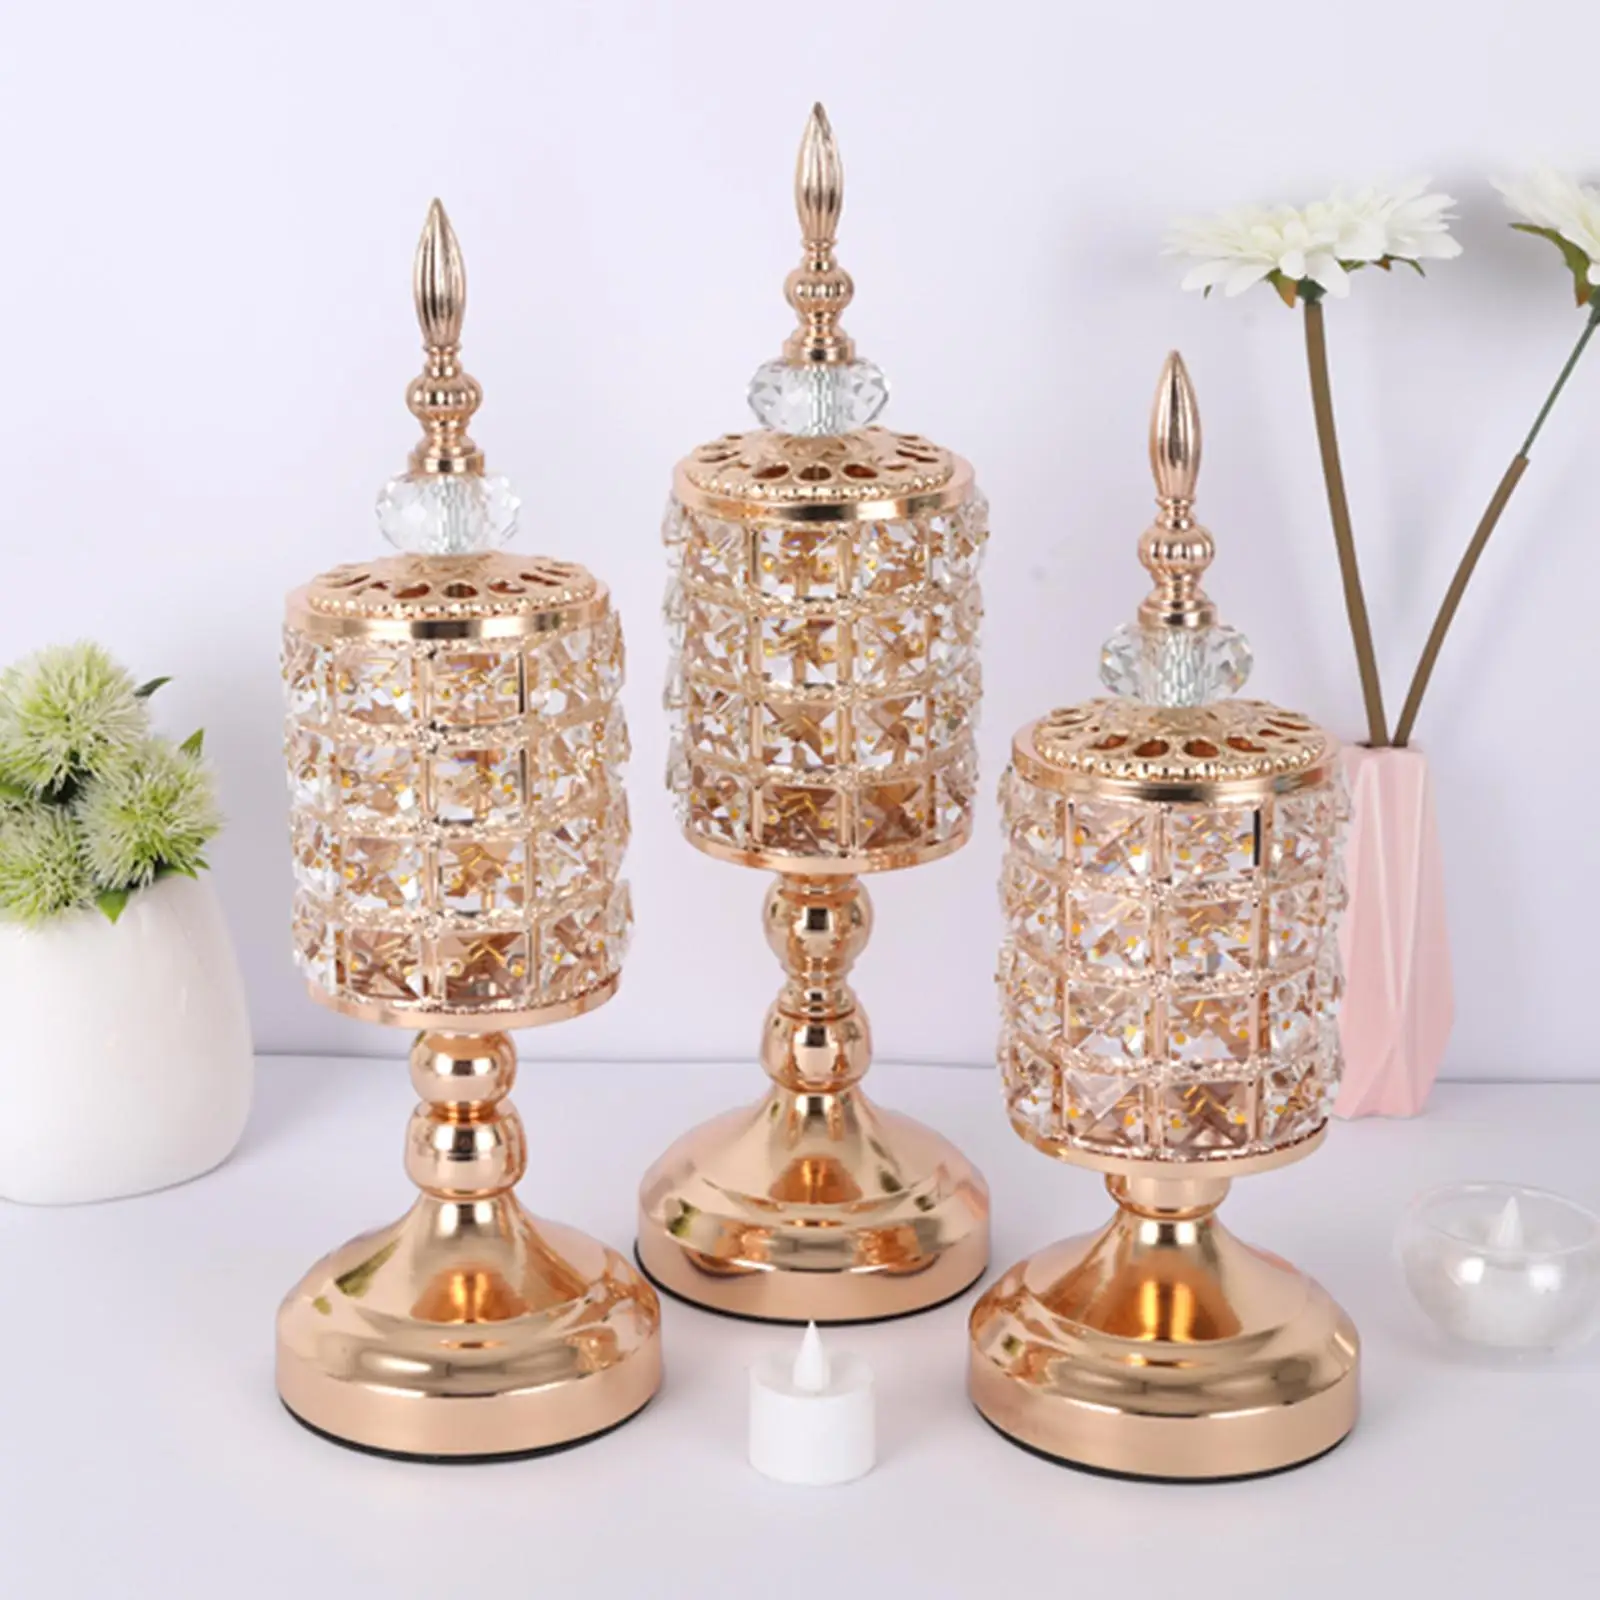 Decorative Crystal Candle Holder Romantic Luxury Elegant for Thanksgiving